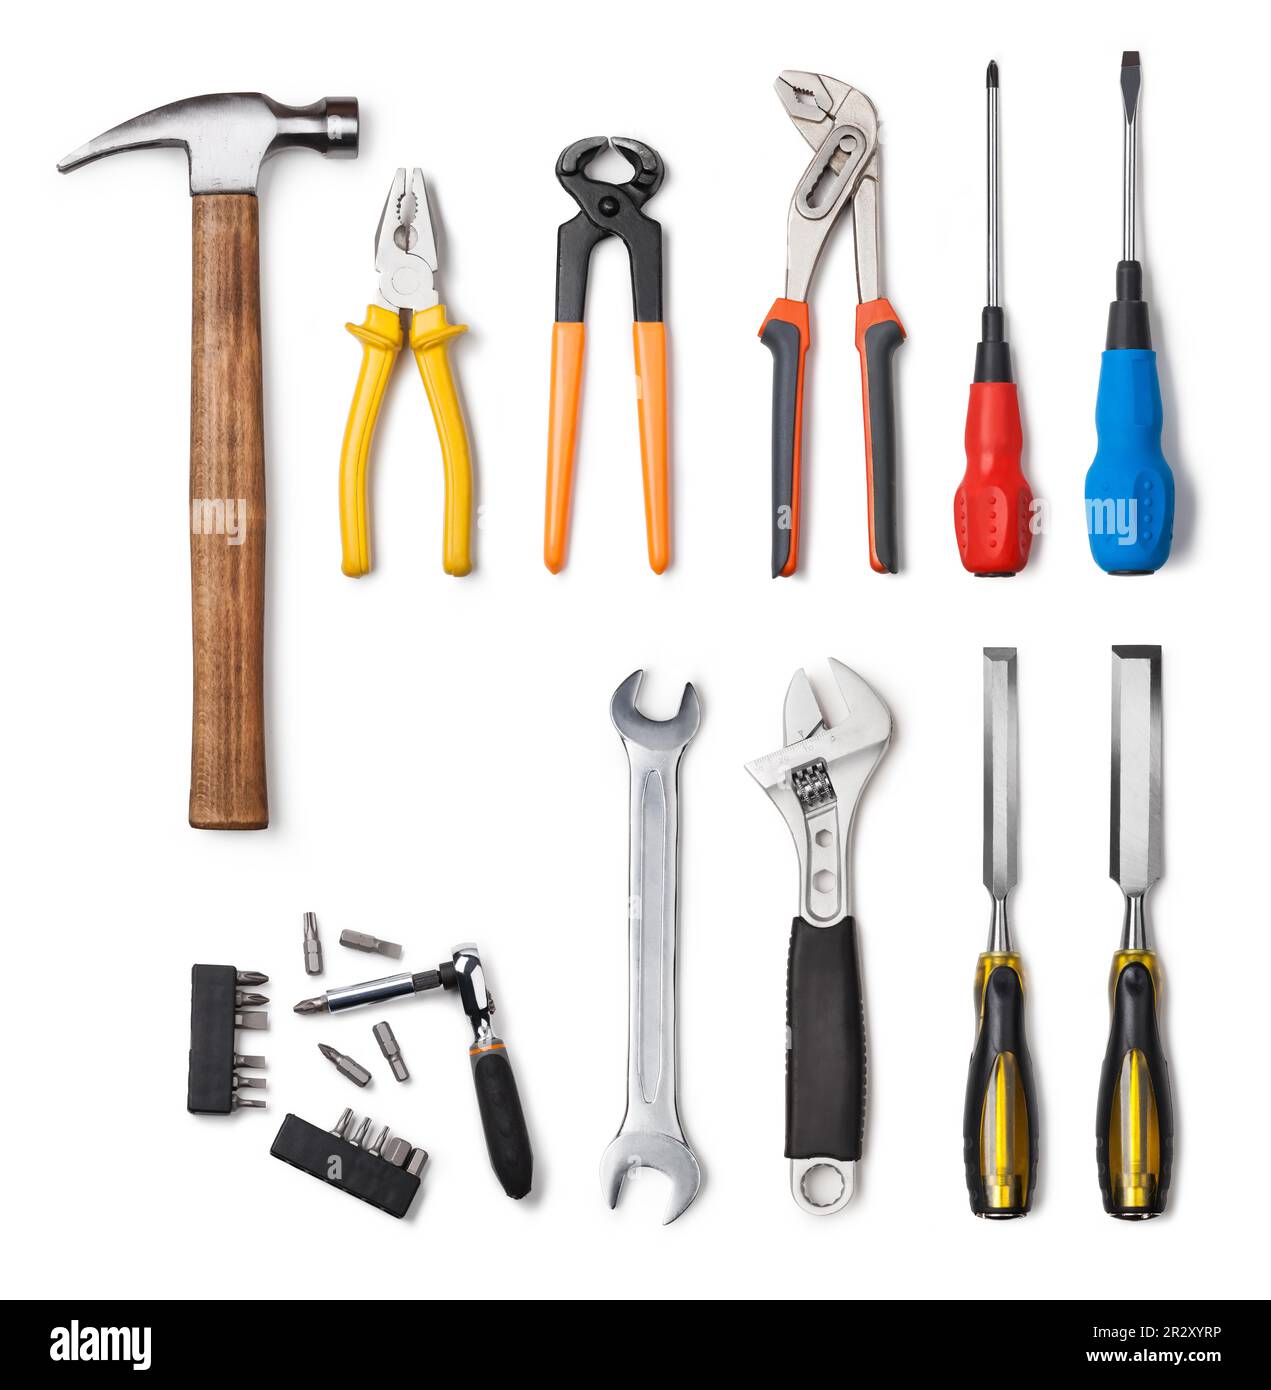 Tools collection isolated on white background Stock Photo - Alamy